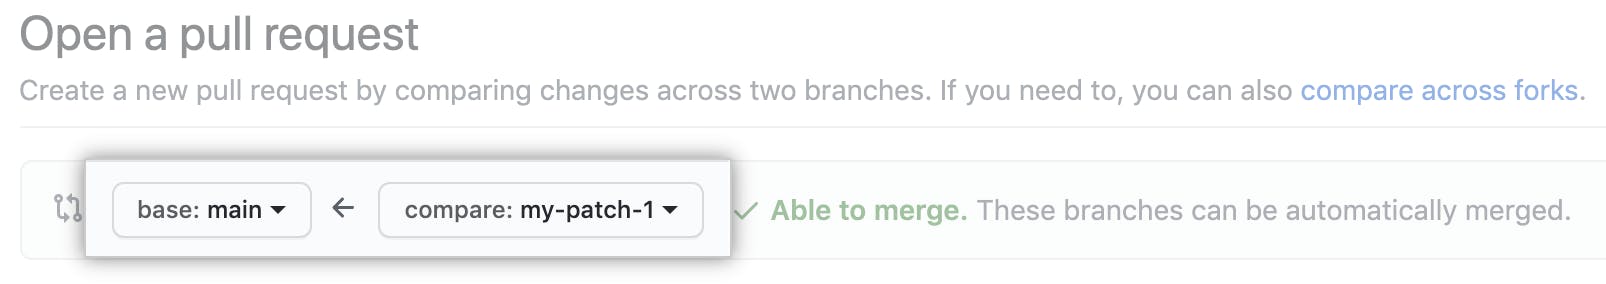 choose-base-and-compare-branches.png